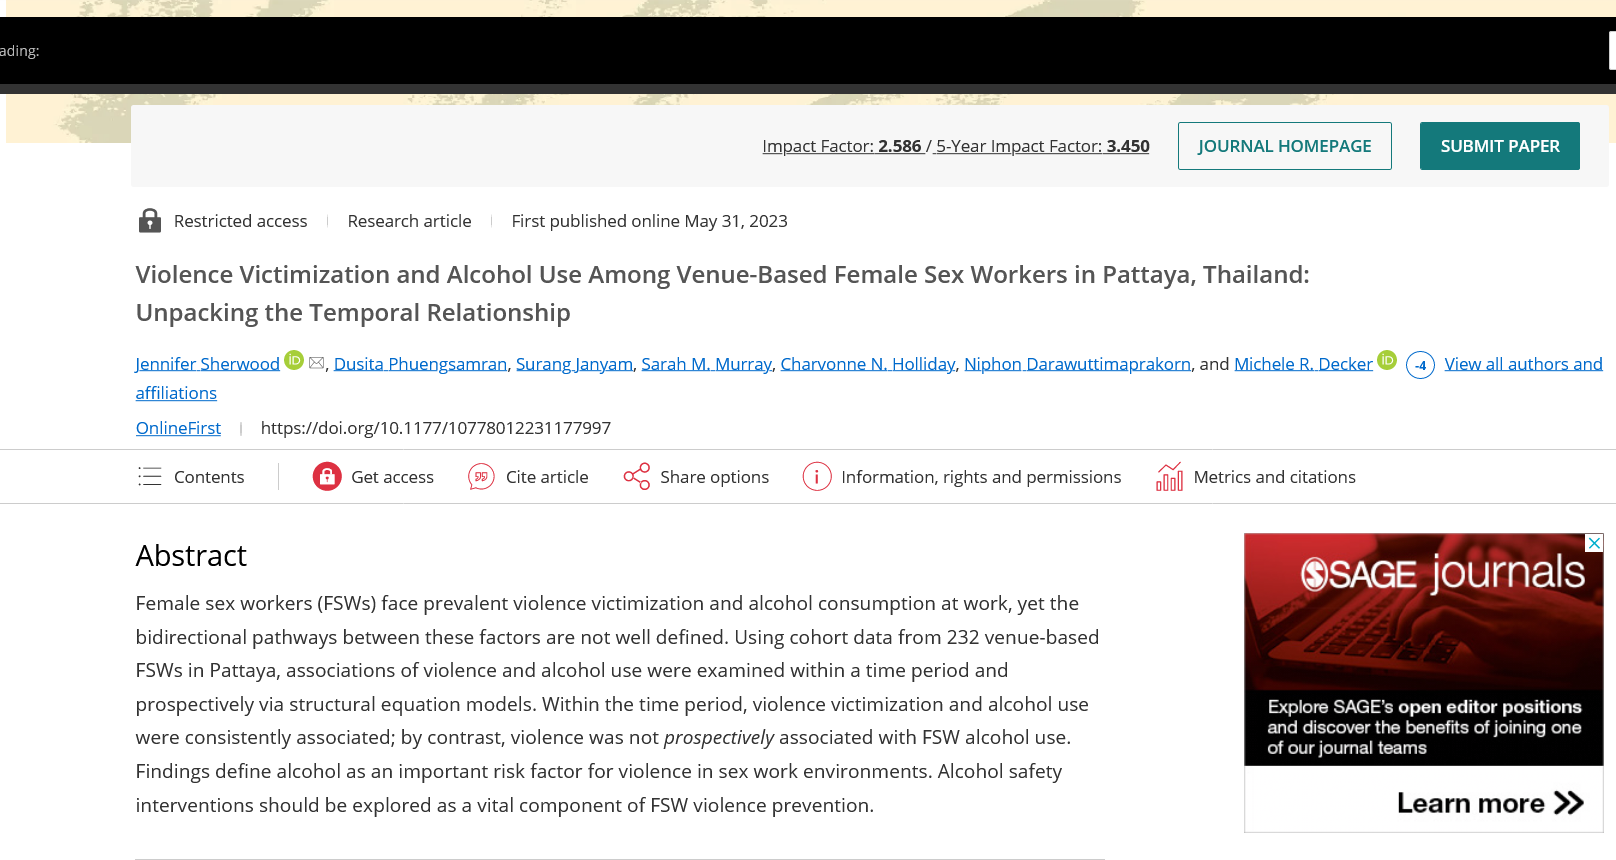 Violence  Victimization and Alcohol Use Among Venue-Based Female Sex Workers in Pattaya, Thailand: Unpacking the Temporal Relationship